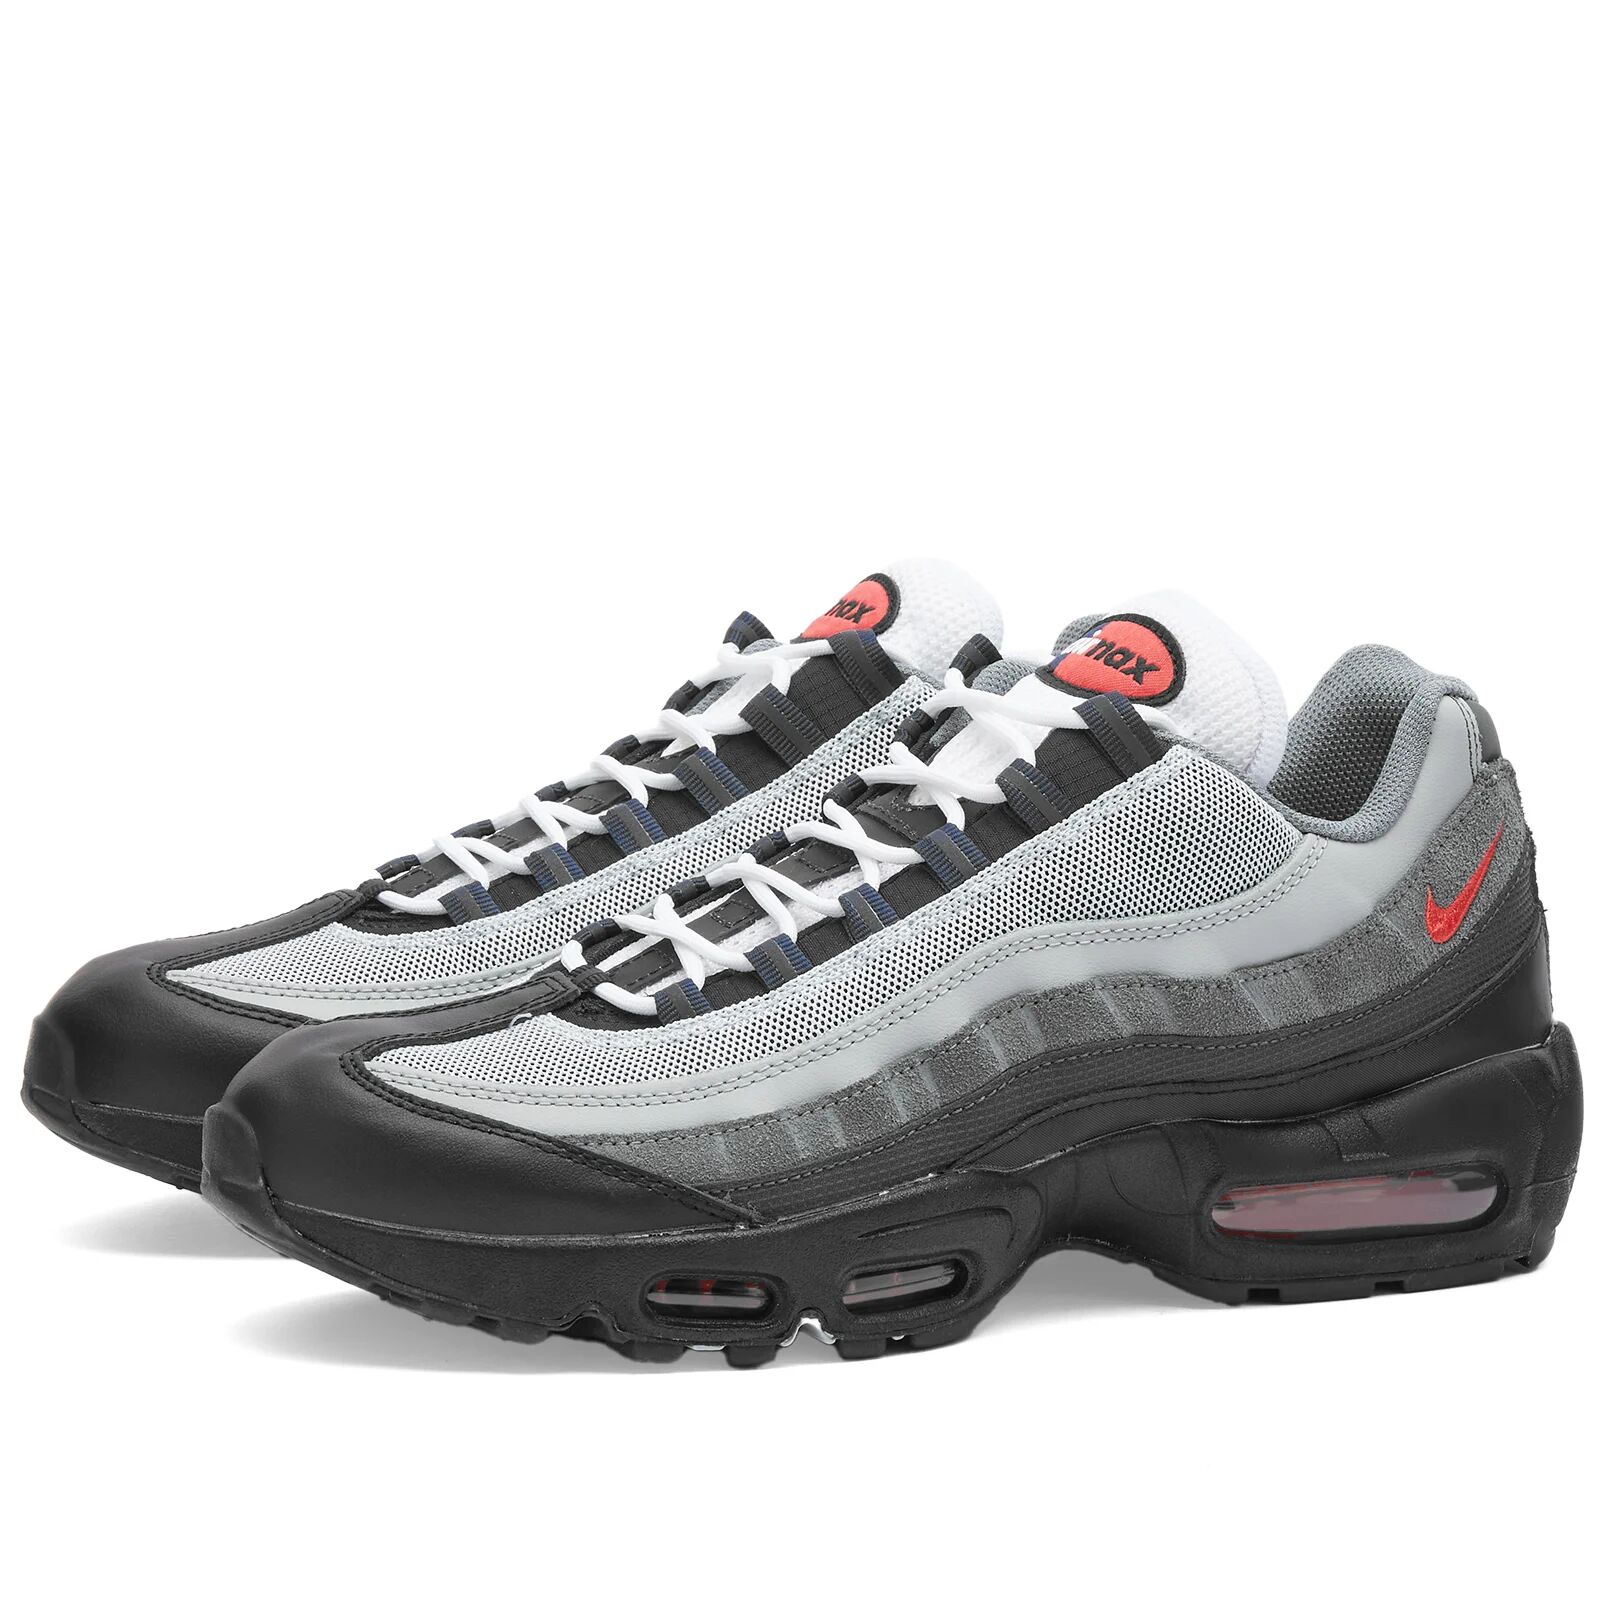 Nike Men's Air Max 95 Essential Sneakers in Black/Track Red, Size UK 6